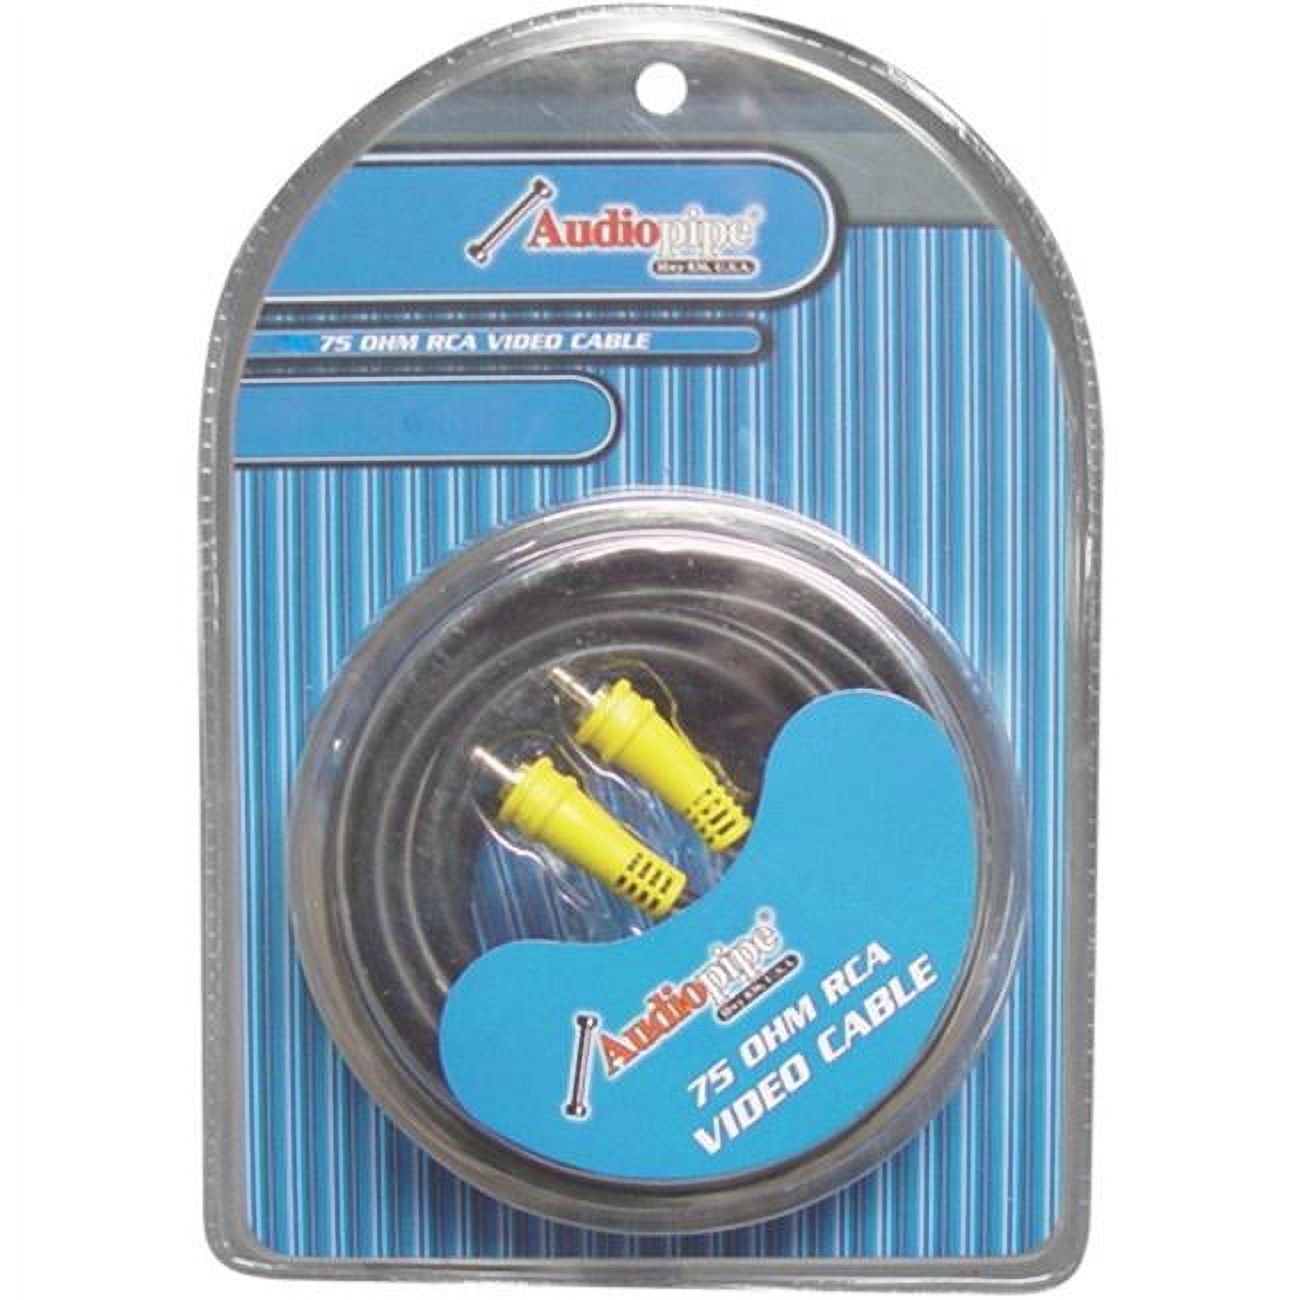 AUDIOP APV12 12 ft. 75 Ohm Rca Video Cable - image 1 of 2